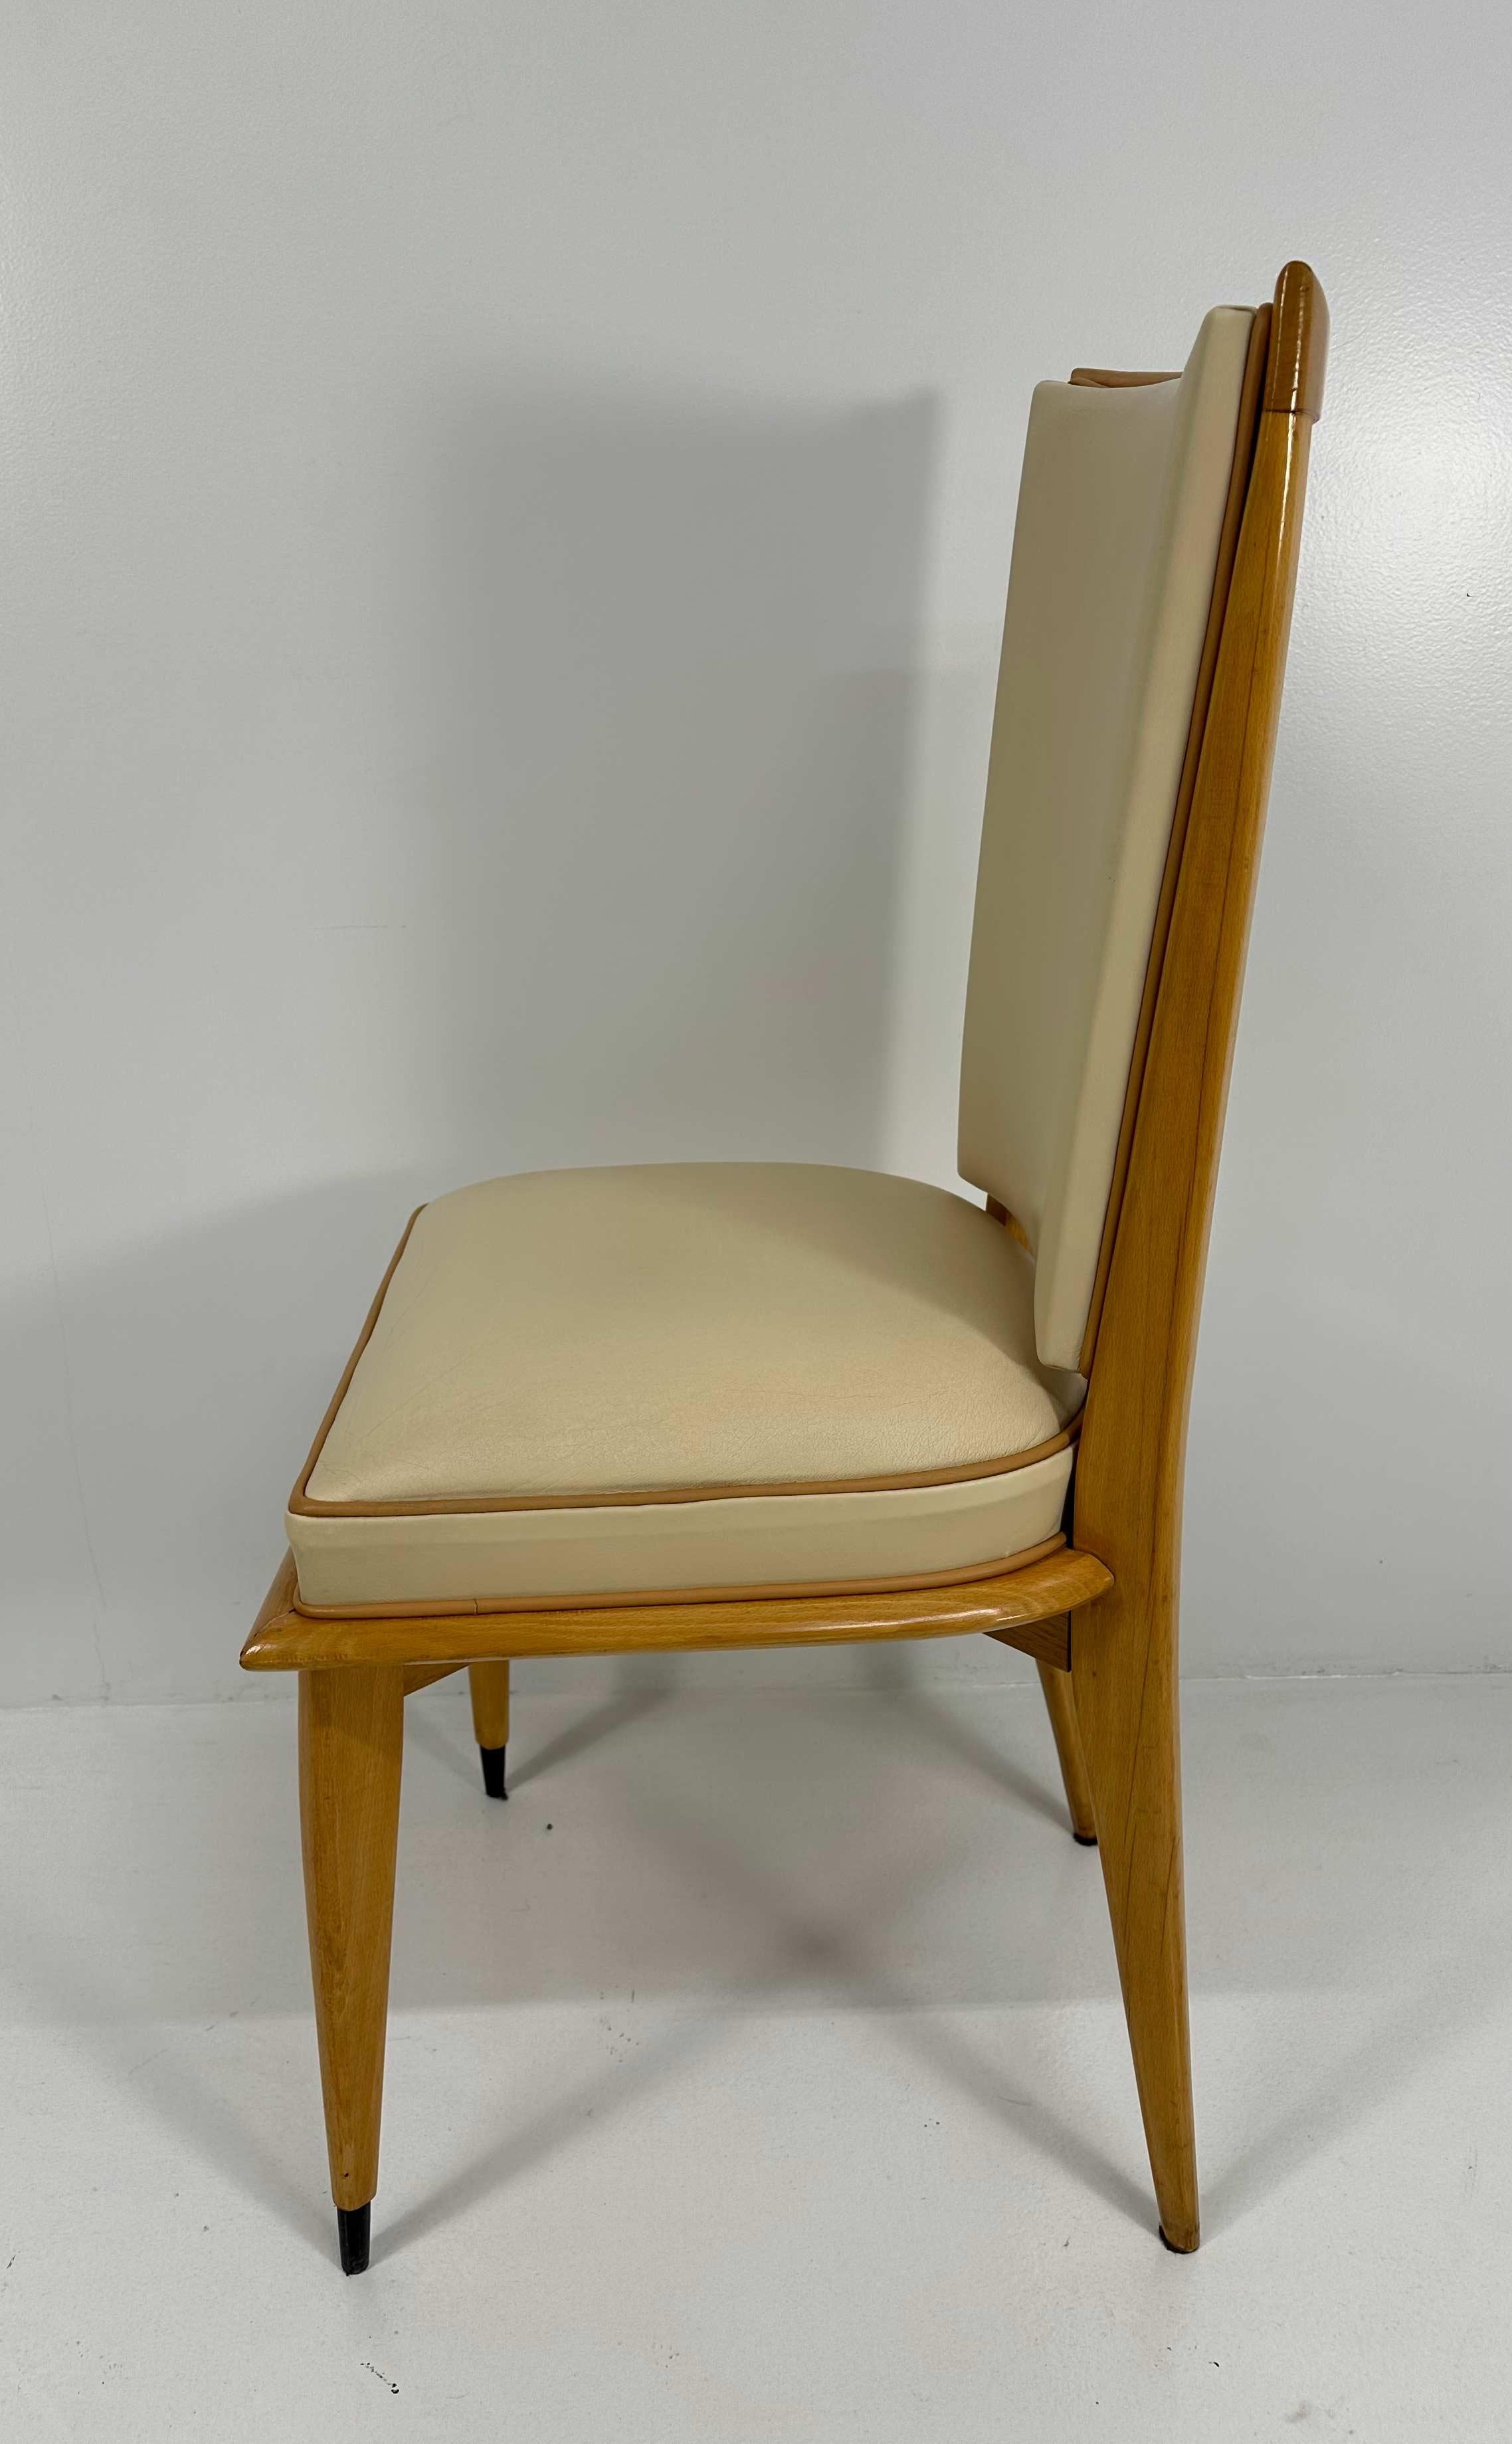 French Art Deco Set of 12 Chairs in Maple and Cream Leather, 1930s For Sale 4